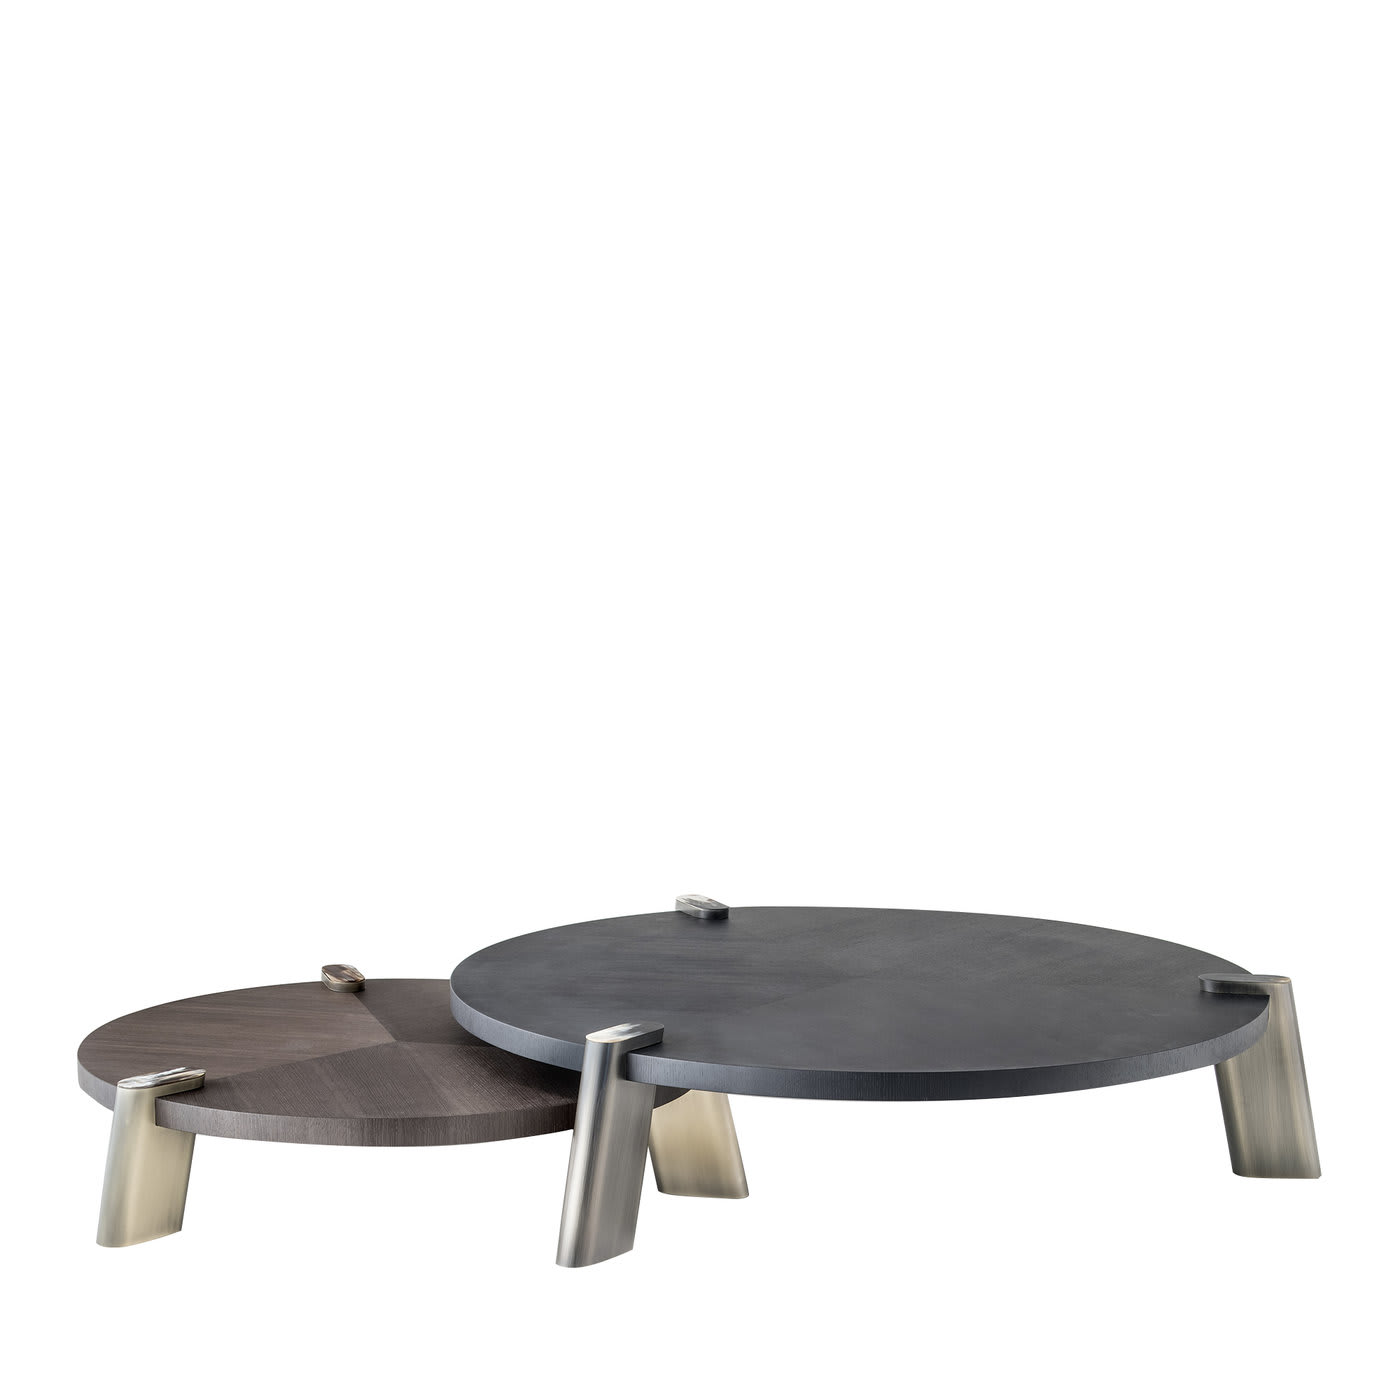 Set of 2 Coffee Nesting Tables - Arcahorn